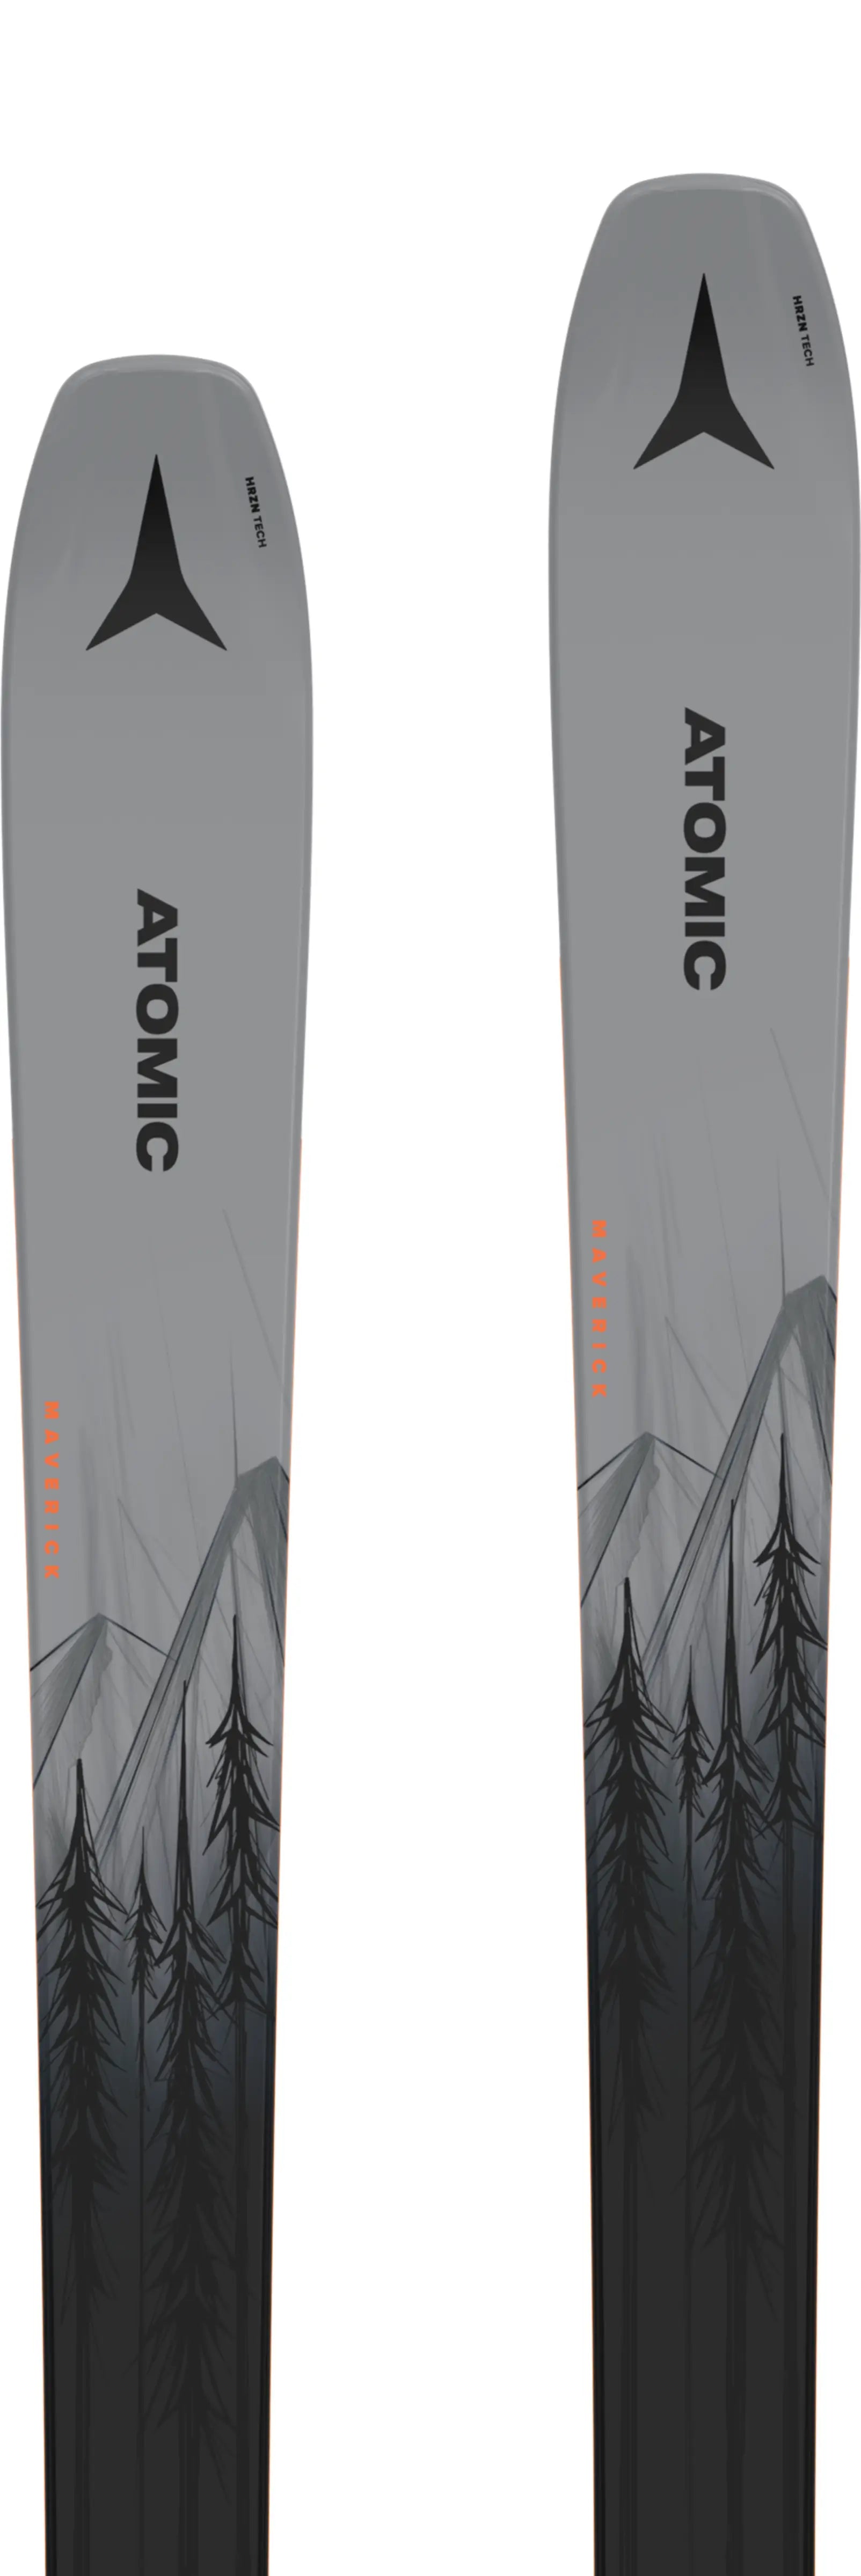 Exact and relaxed, the all-mountain Atomic Maverick 88 TI ski offers the perfect balance of performance and playfulness.